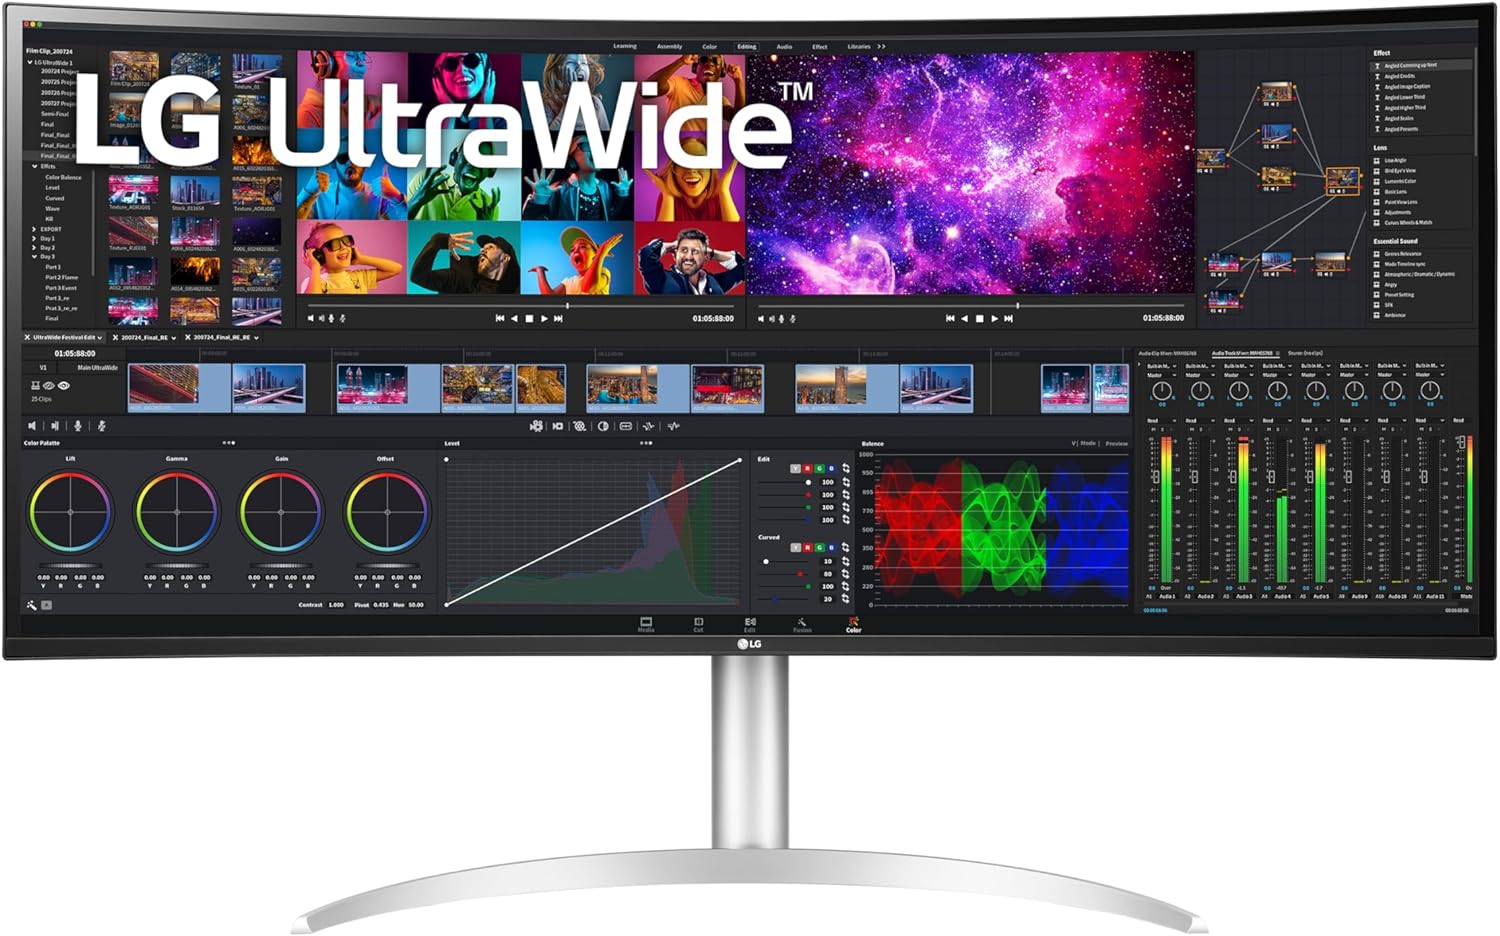 LG UltraWide editing monitor for photography